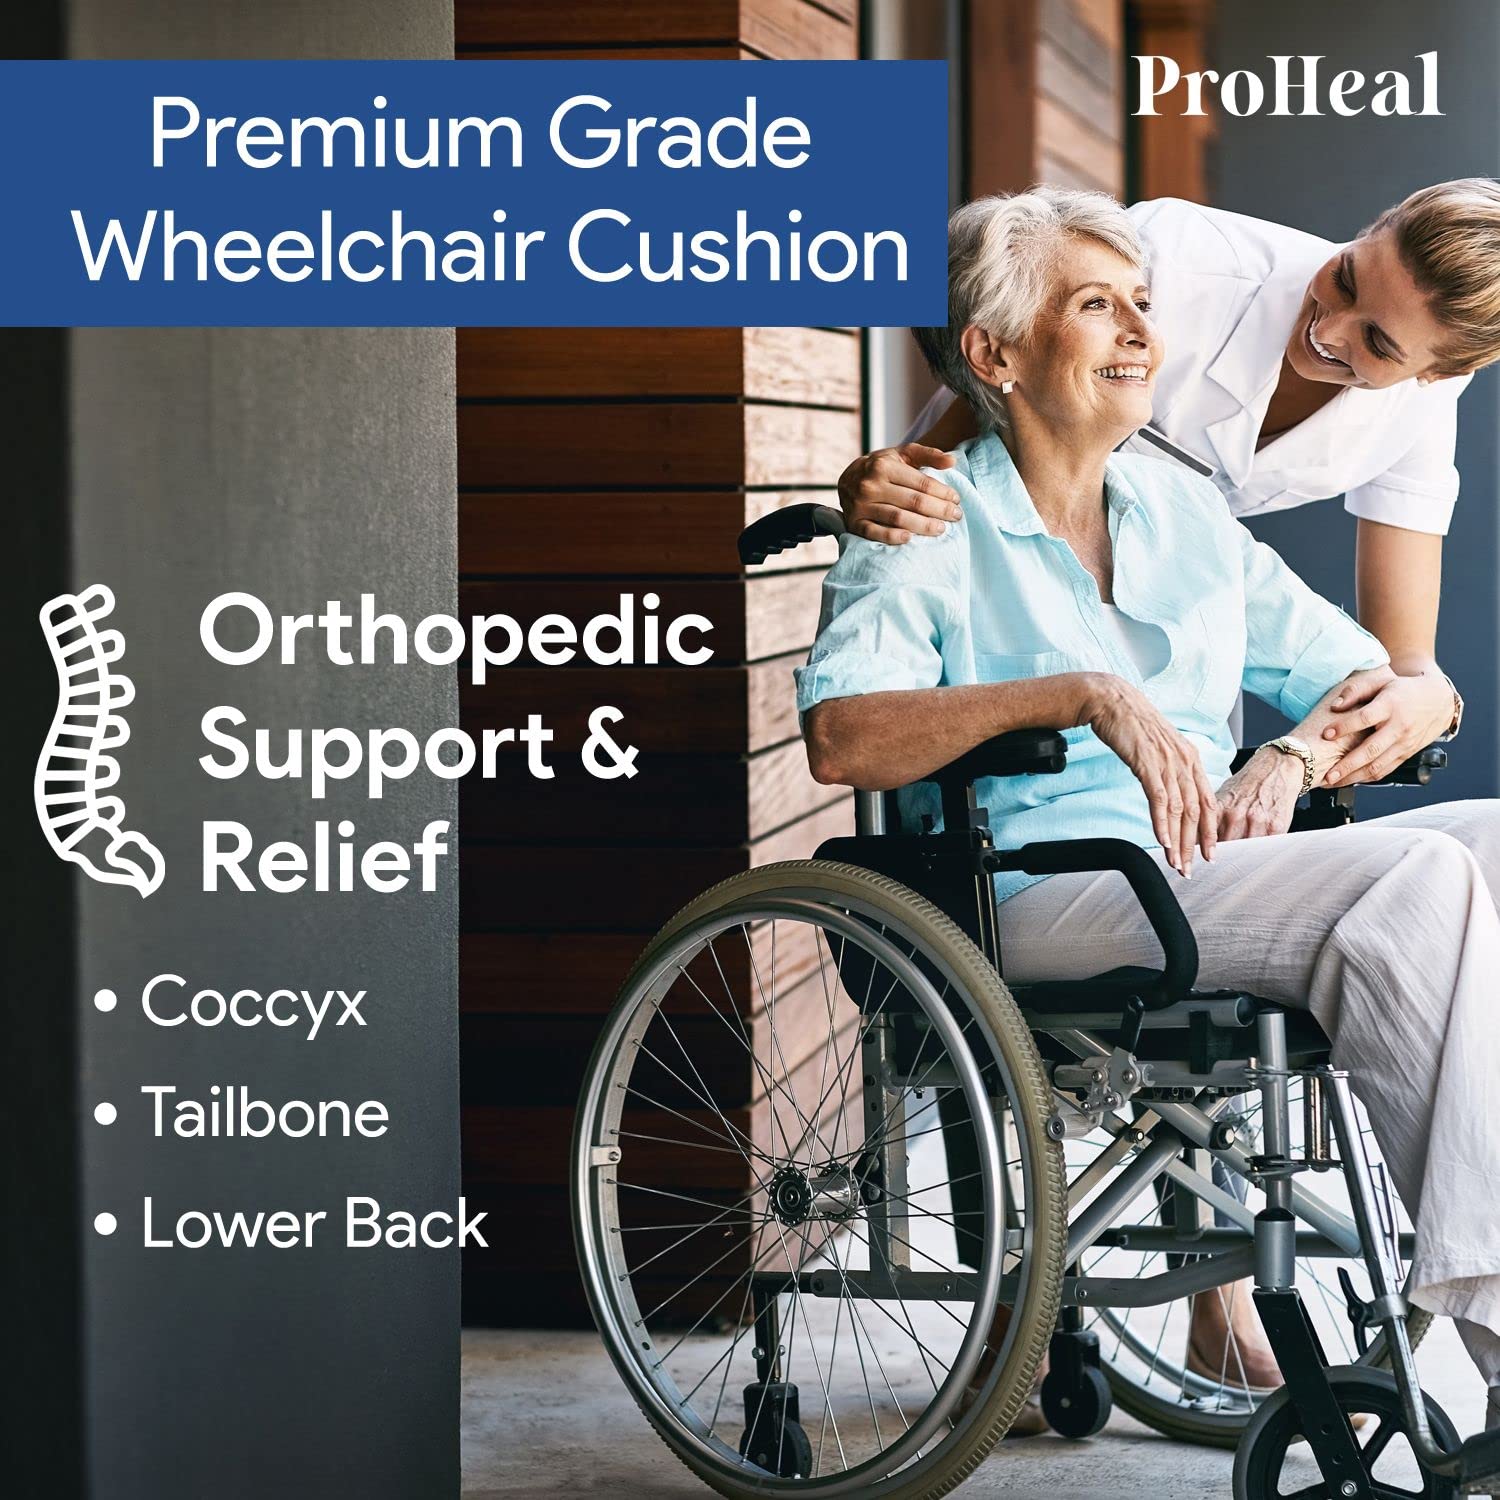 ProHeal Foam Wheelchair Cushion - Comfort and Pressure Relief Seat Cushion for Office Chair - Prevents and Treats Pressure Sores - Breathable and Fluid Resistant Stretch Nylon Cover  - Like New